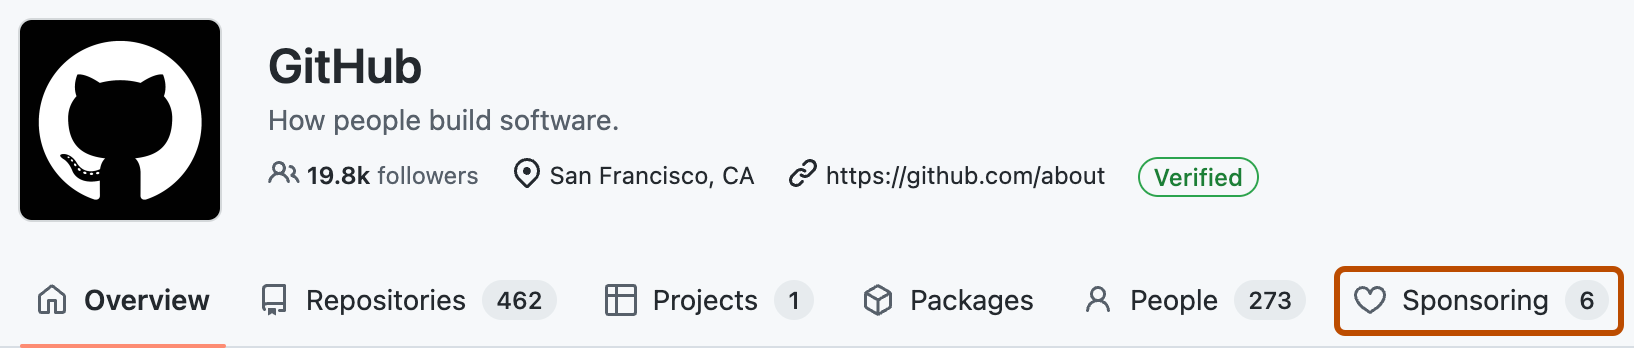 Screenshot of the "GitHub" organization's home page. A menu tab, labeled "Sponsoring," is outlined in dark orange.